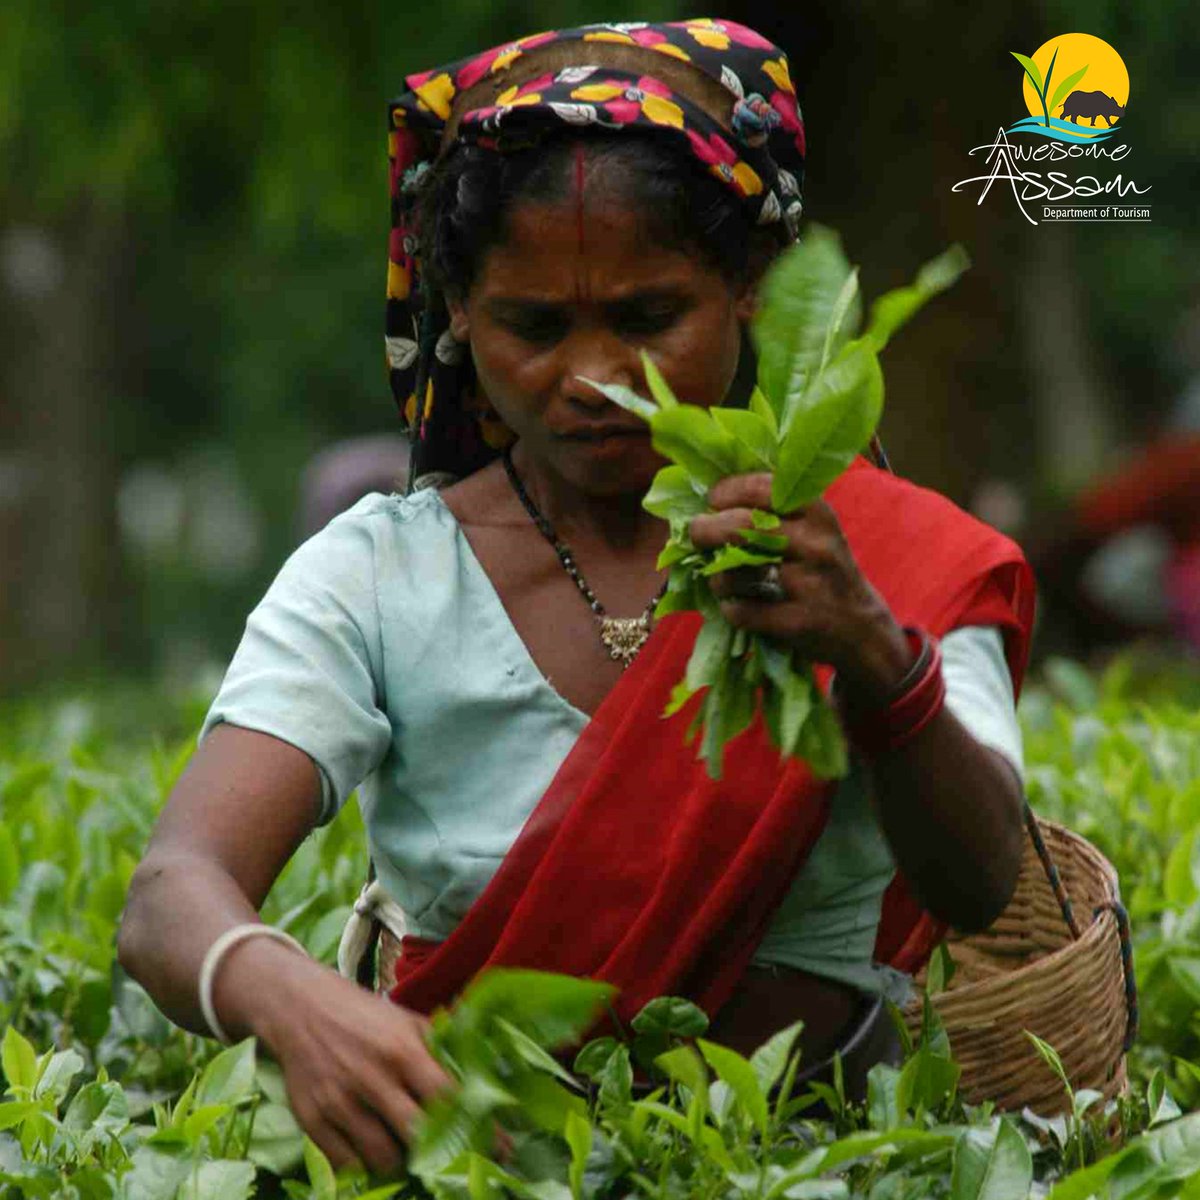 The tea leaves that make their way to your morning cup are meticulously chosen by skilled tea pluckers. Sip on freshly brewed , authentic Assam tea  and let the aroma and robust flavours awaken your senses. 

#AwesomeAssam #AssamTourism #Assam #VisitAssam #TeaLeaves #AssamTea